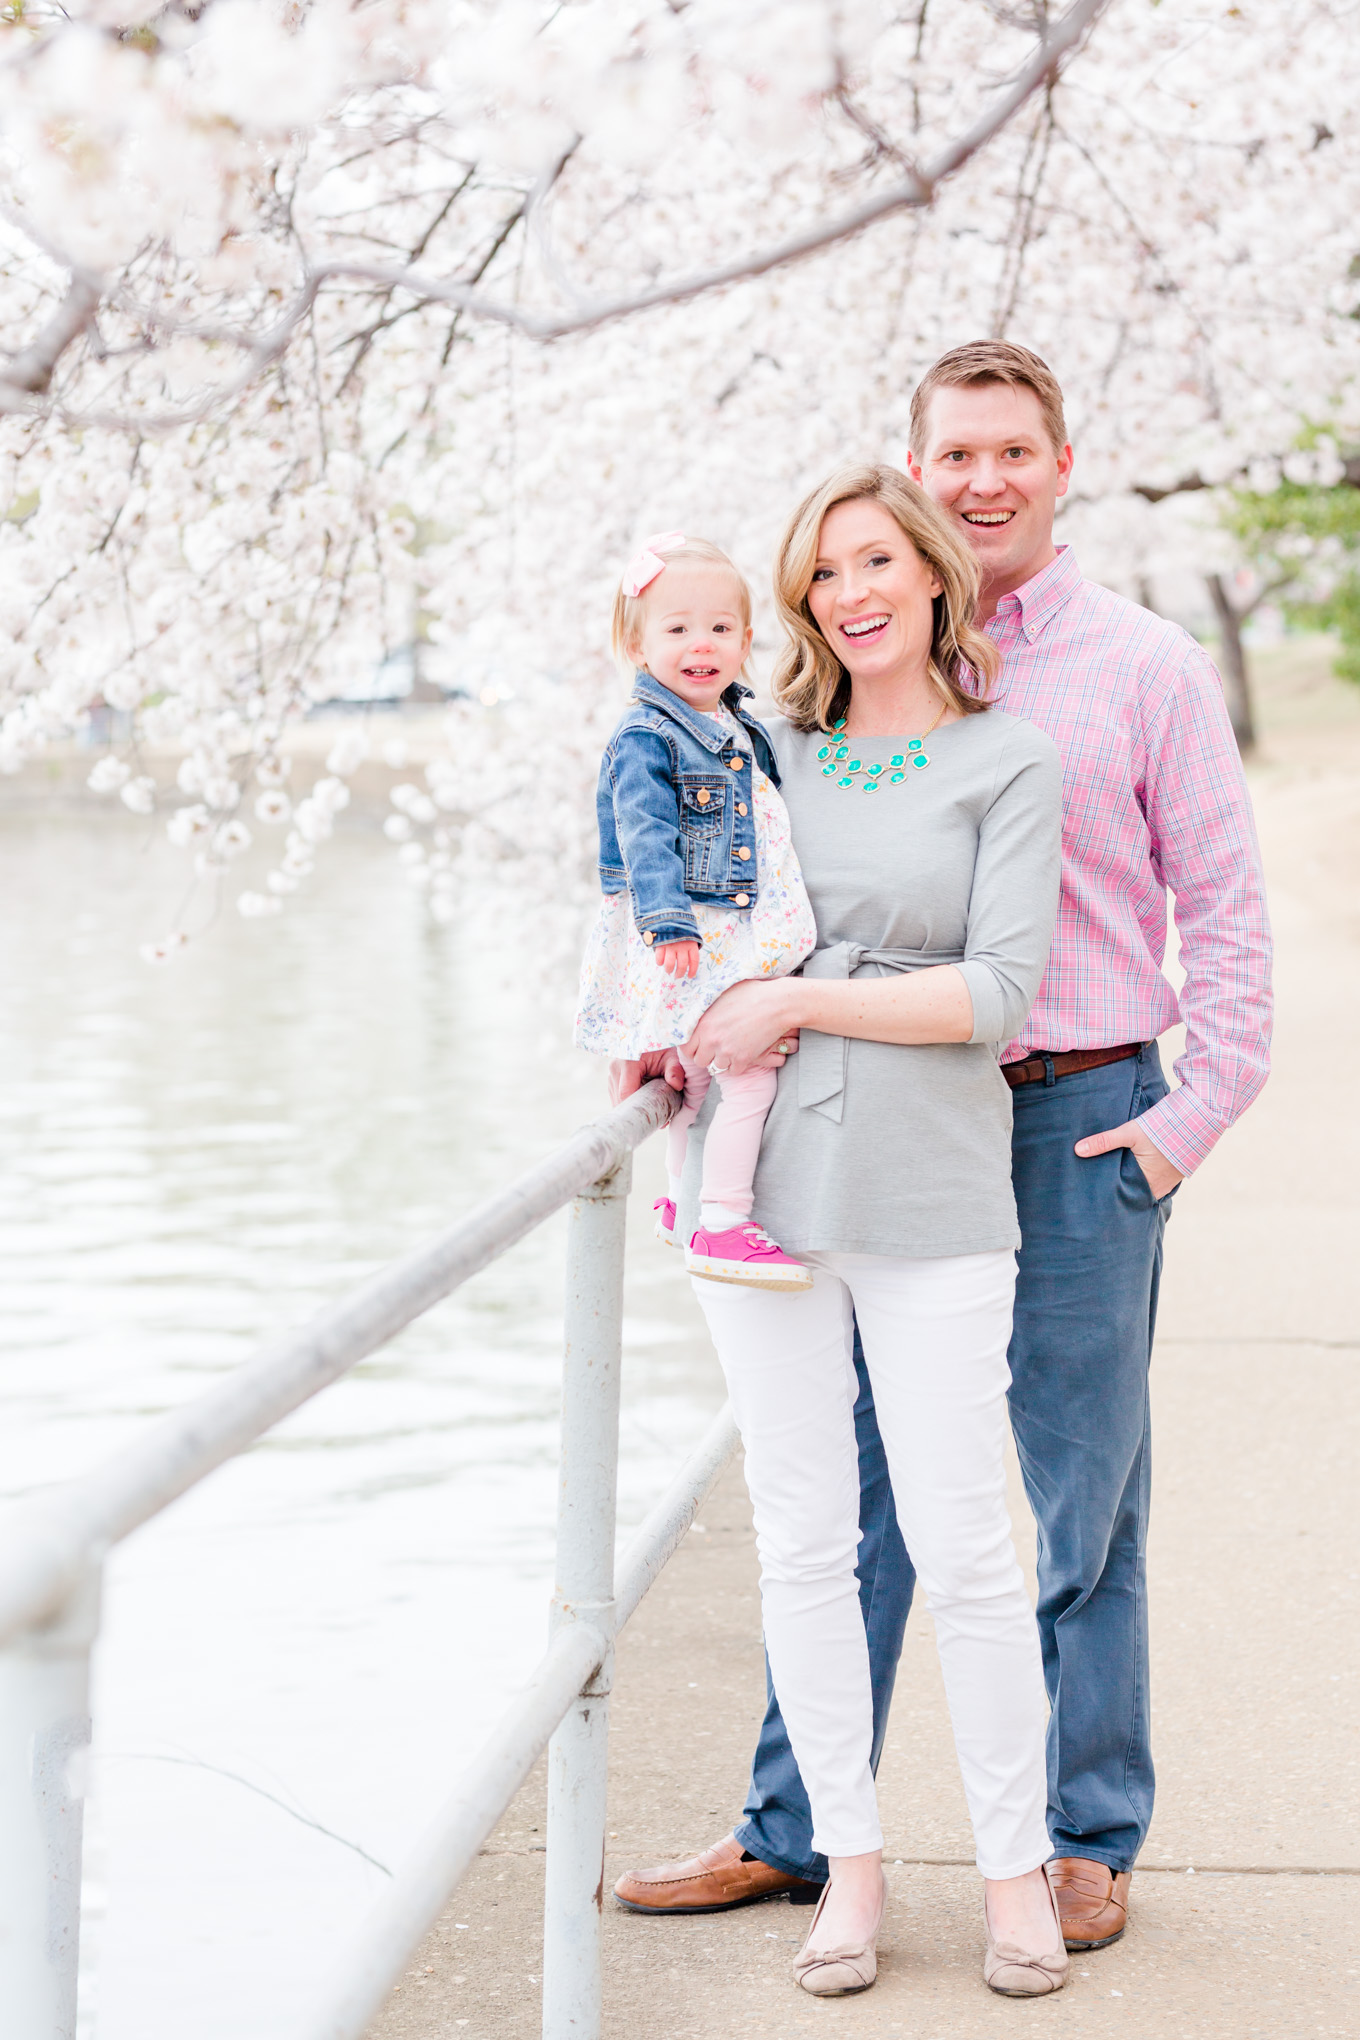 big weekend, cherry blossoms, DC cherry blossoms, tidal basin, DC tidal basin, family of three, toddler girl, photo shoot outfit ideas, what to wear, family portraits, cherry blossom portraits